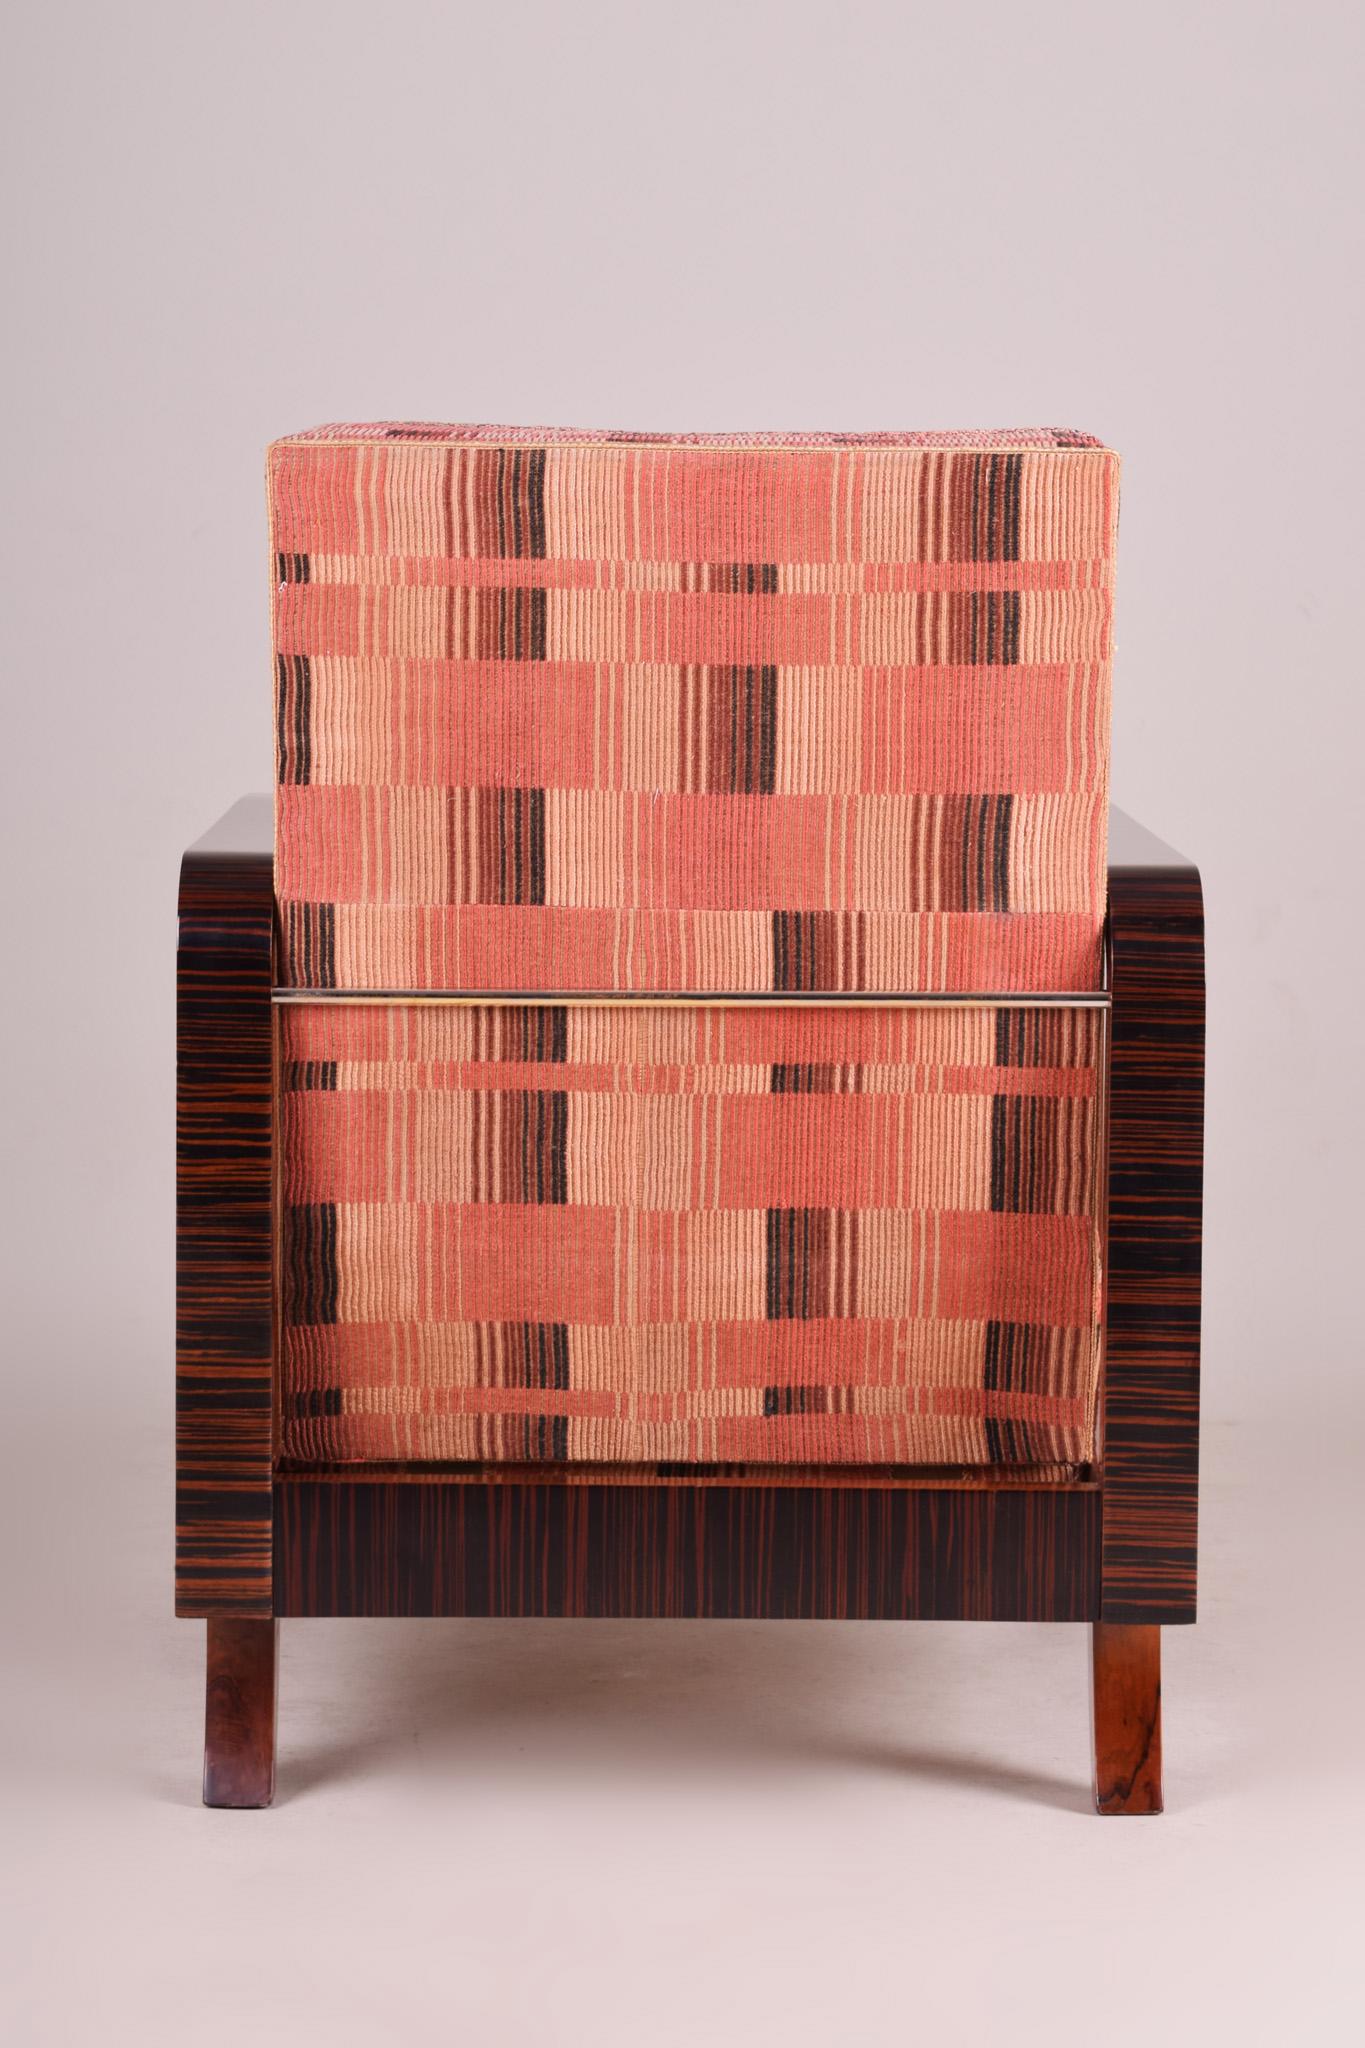 Pink Art Deco Armchair, Made in 1930s Czechia and Restored, Original Fabric For Sale 6